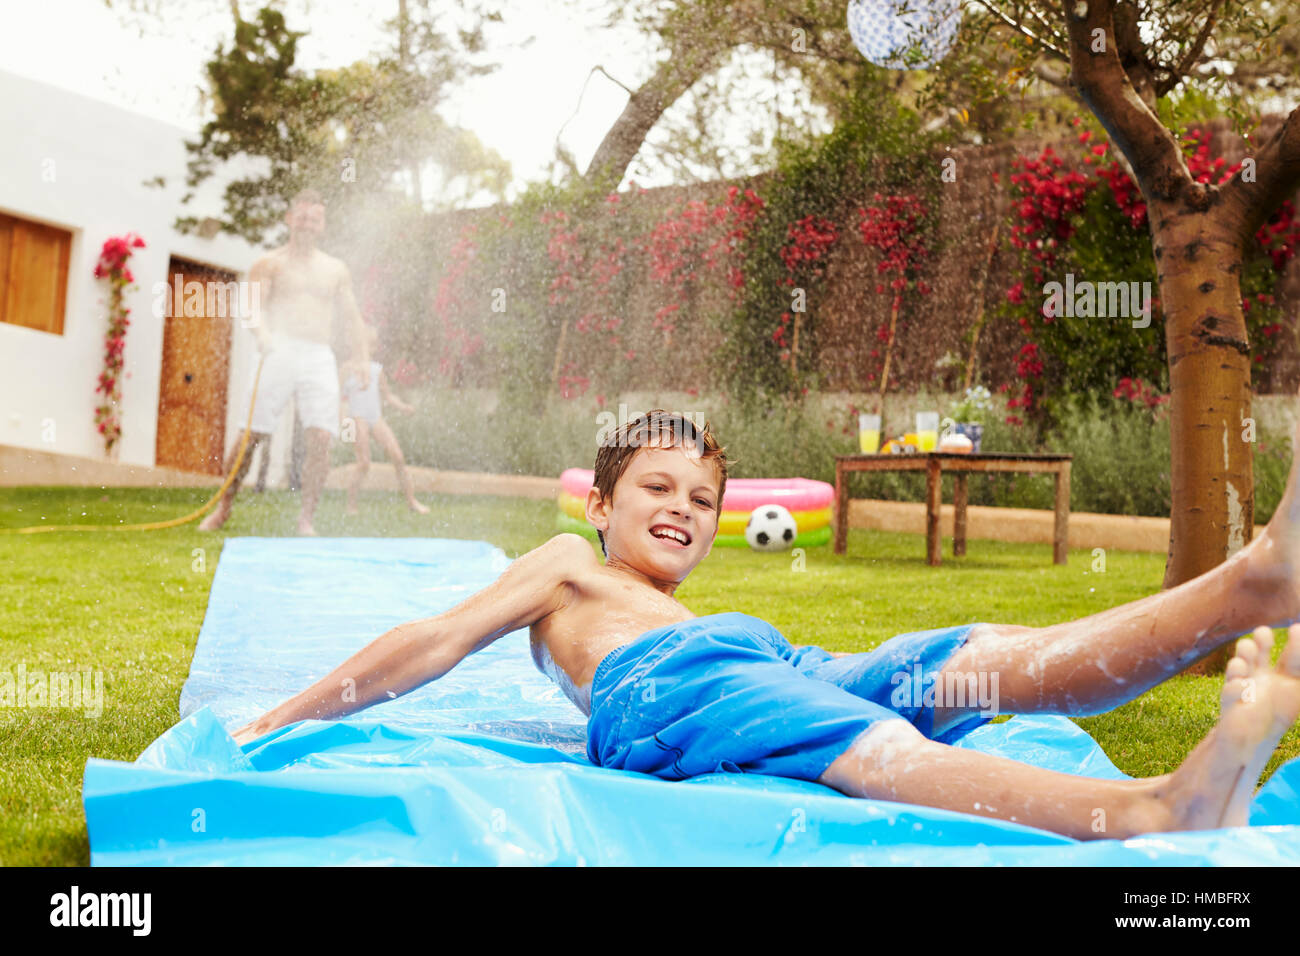 Father And Son Having Fun On Water Slide In Garden Stock Photo